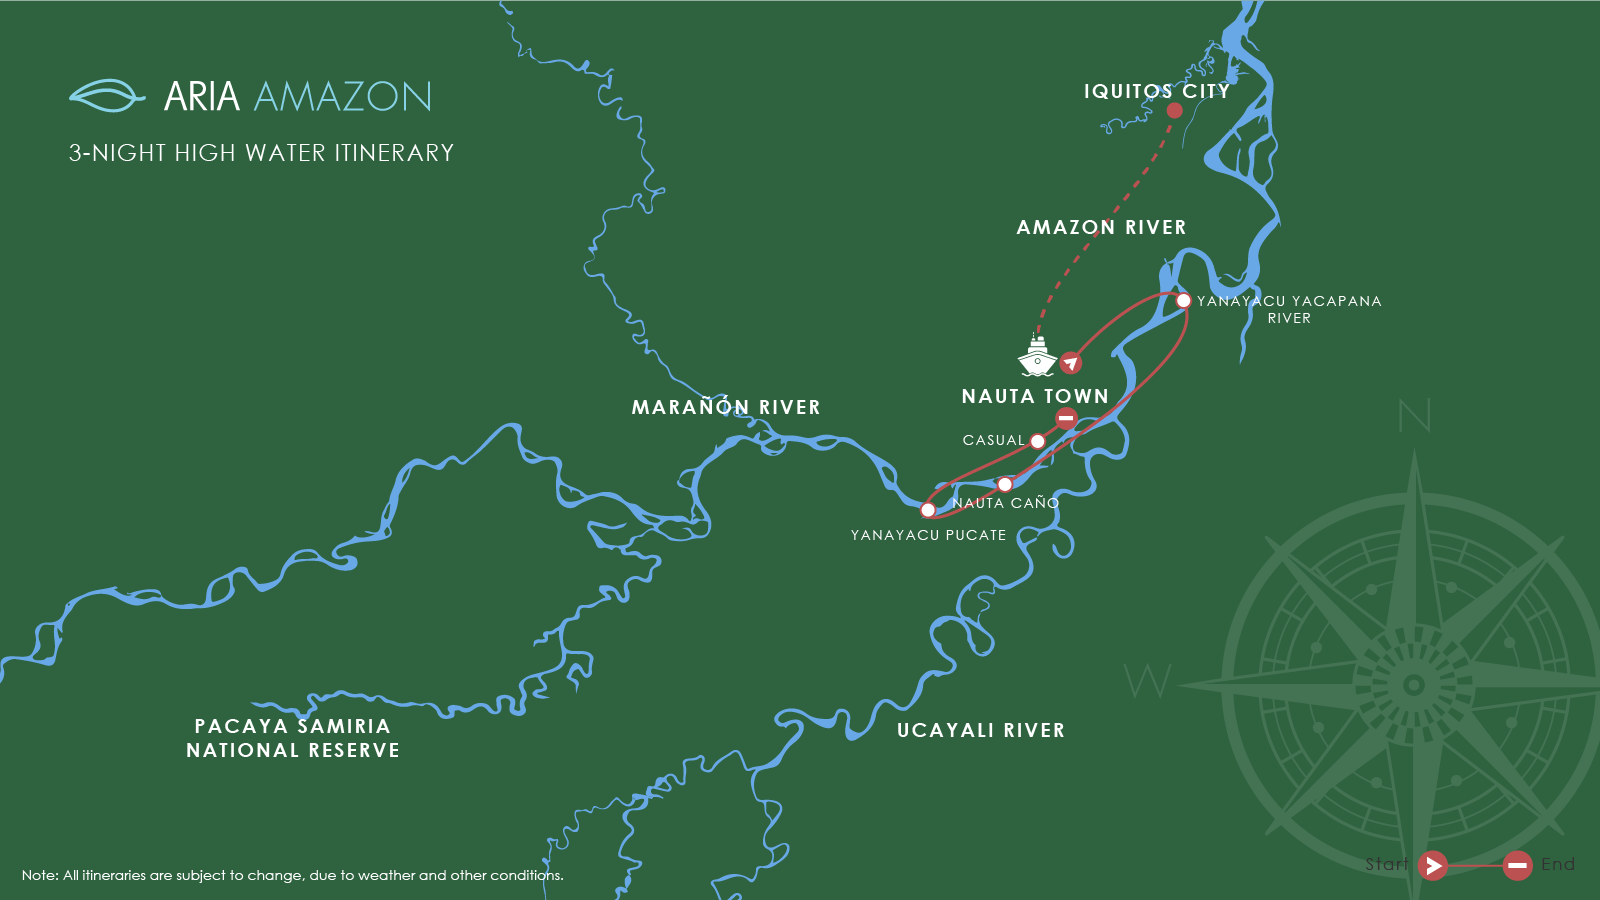 Route map of Aria Amazon River Cruise 4-day high-water itinerary, round-trip from Iquitos, Peru, sailing round-trip from Nauta with visits along the Maranon river.